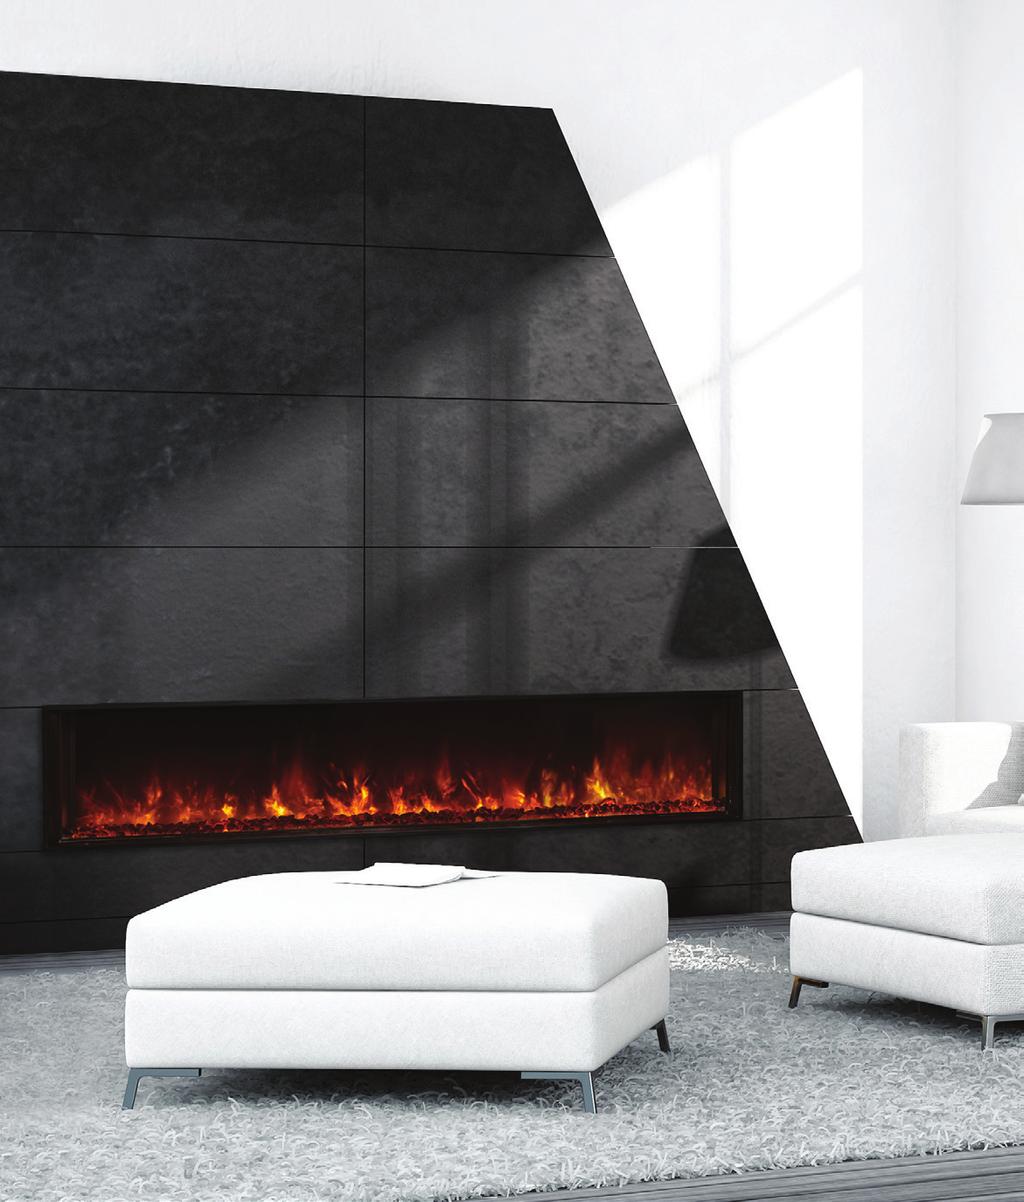 LFV1000/400-AU Landscape FullView Built-in flush mount The Landscape FullView built-in electric fireplace is the first of its kind